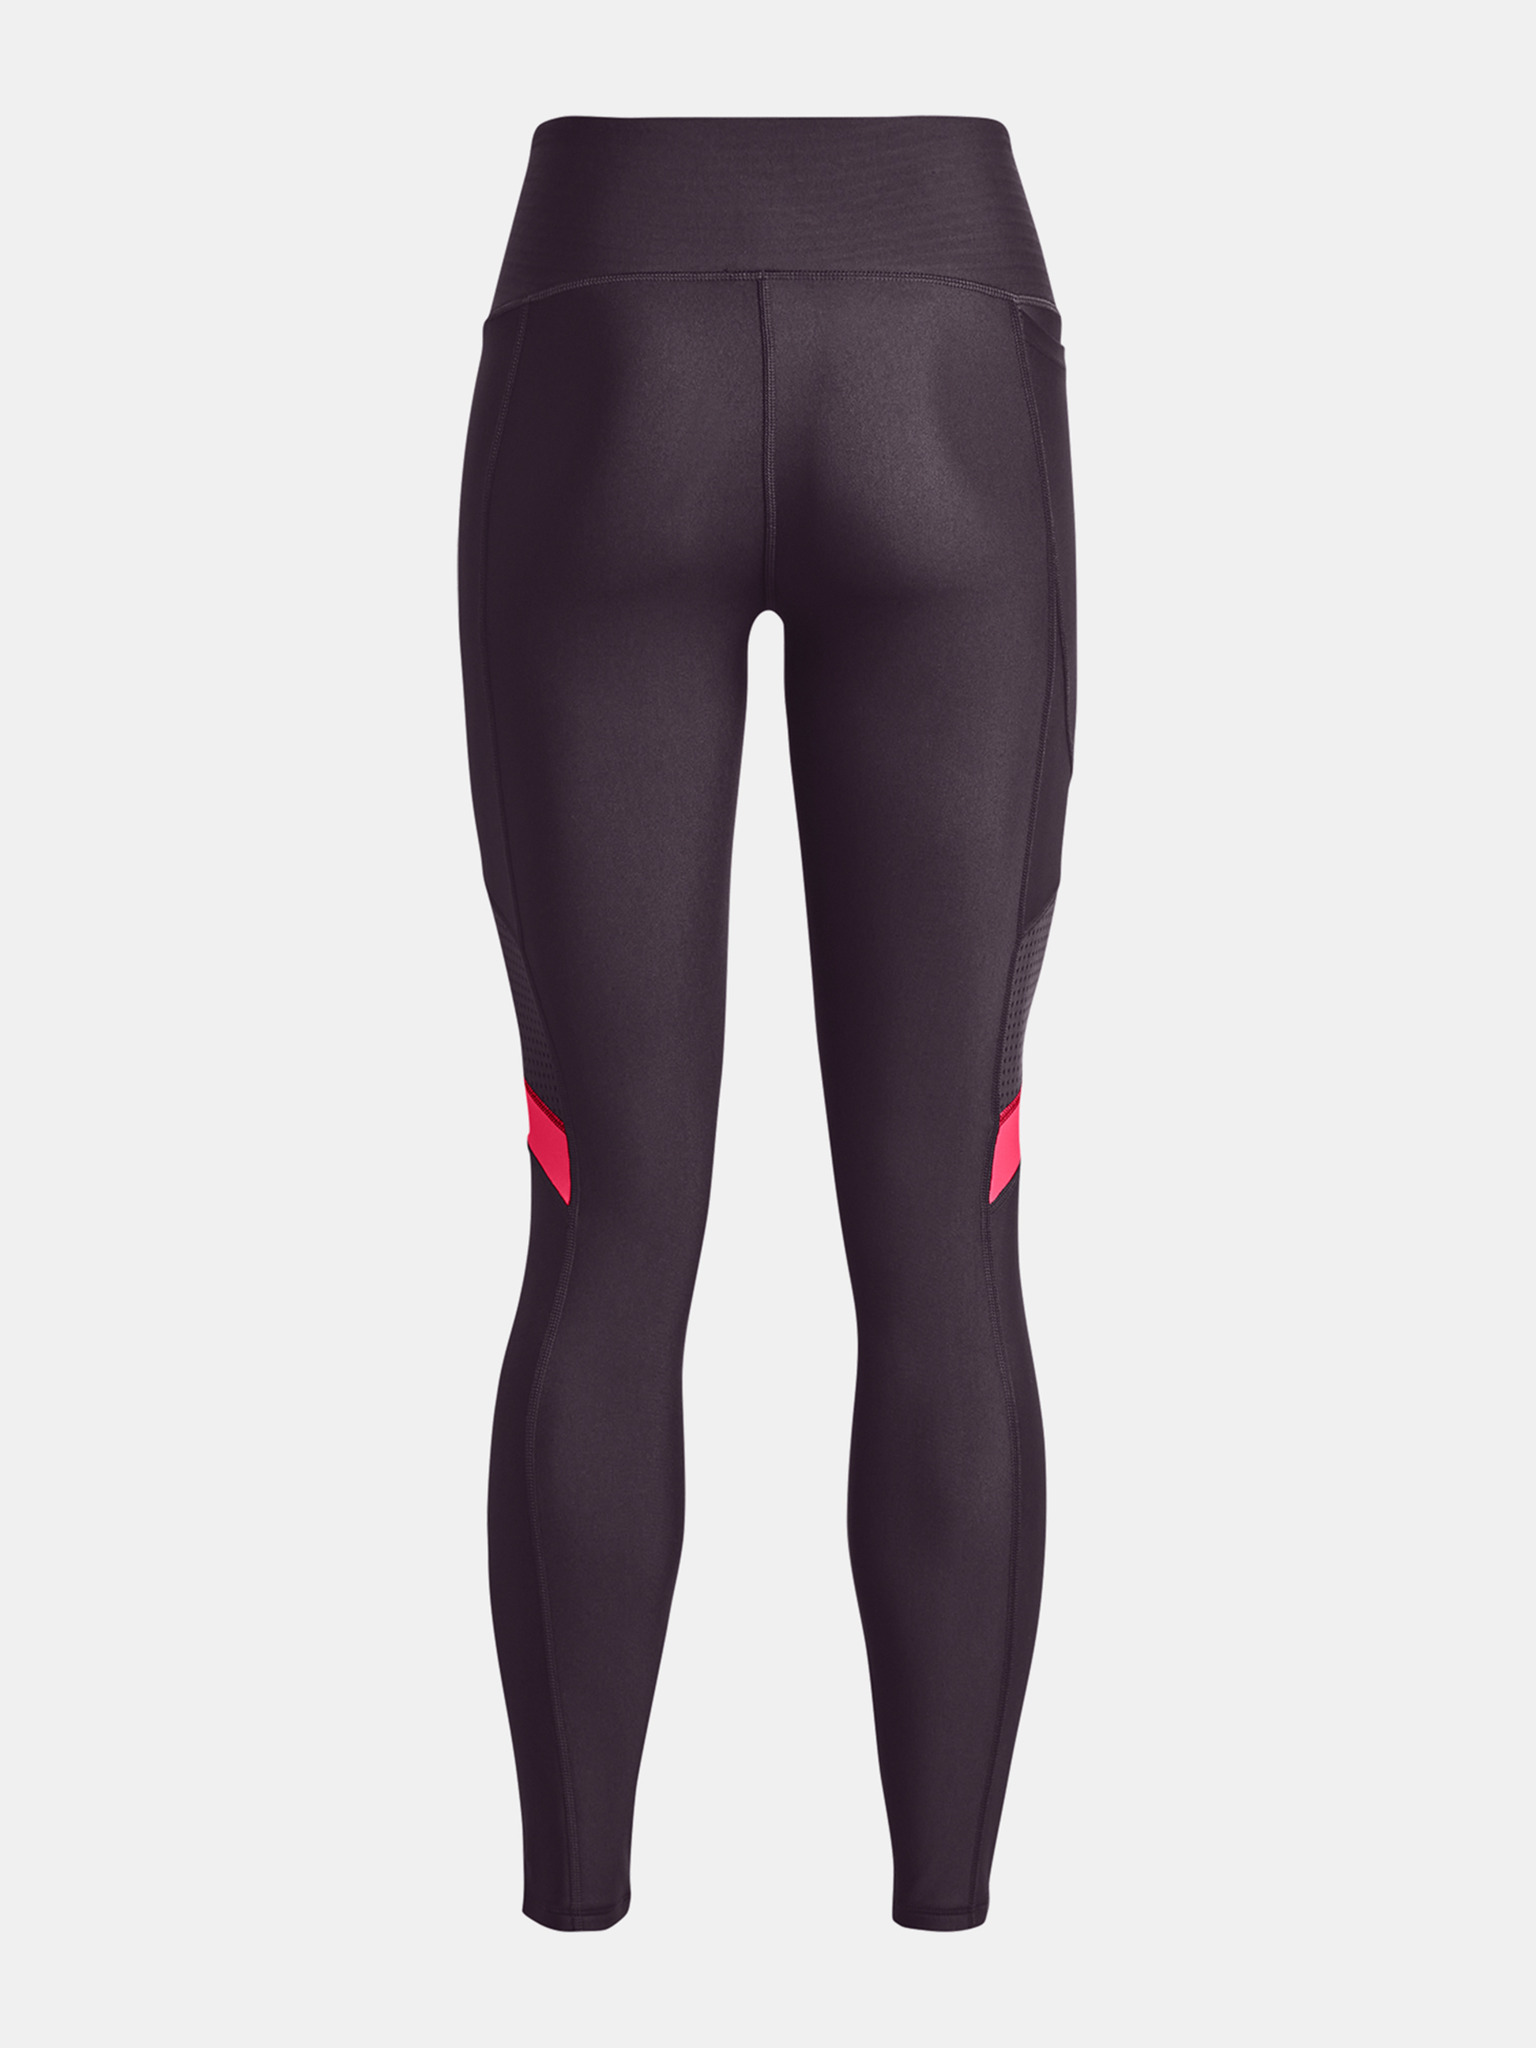 Malla UNDER ARMOUR ARMOUR BLOCKED ANKLE LEGGING Mujer - Esports Parra